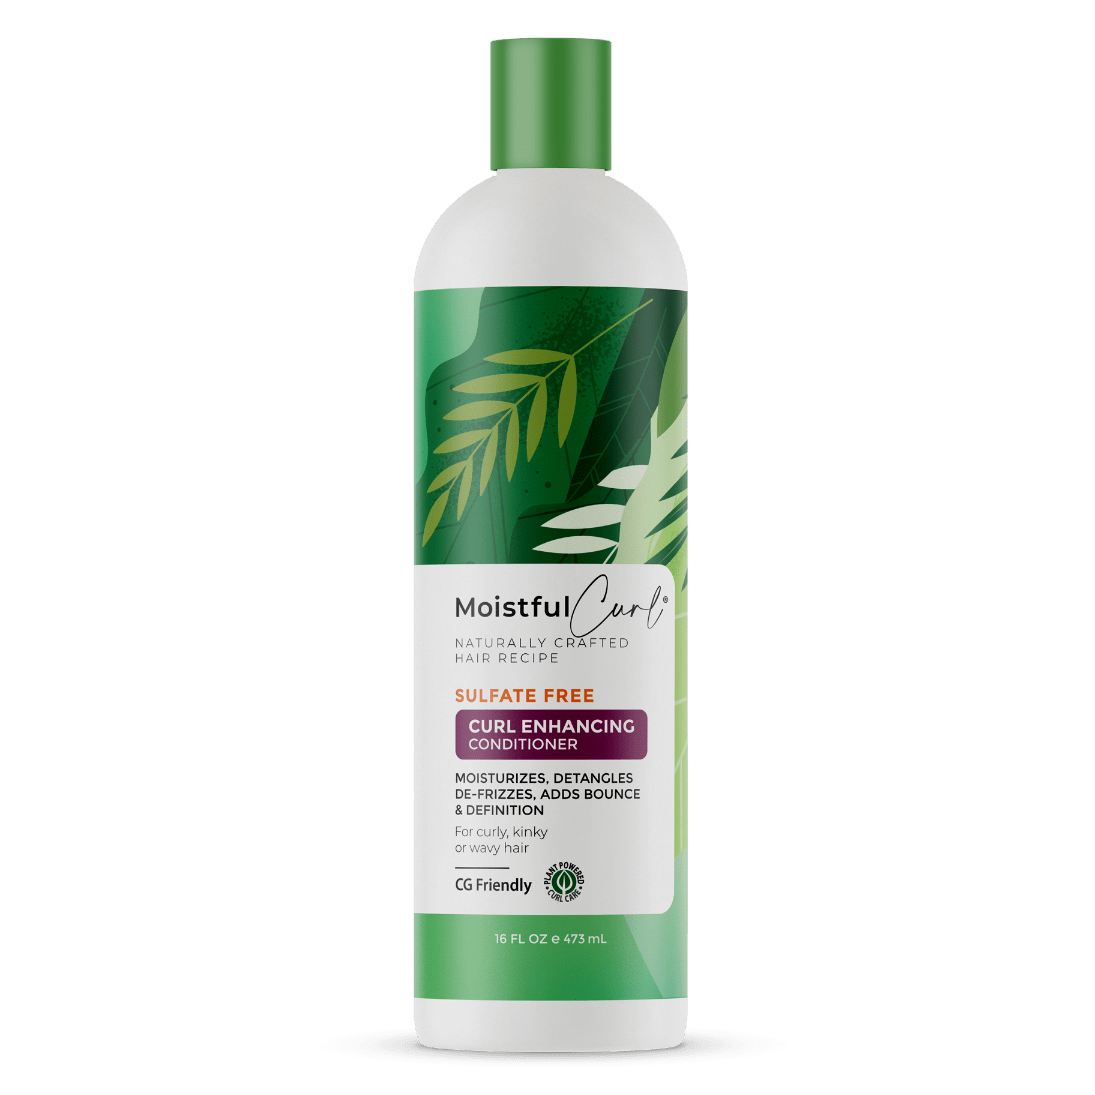 Moistful Curl Sulfate Free Curl Enhancing Conditioner 473 ML